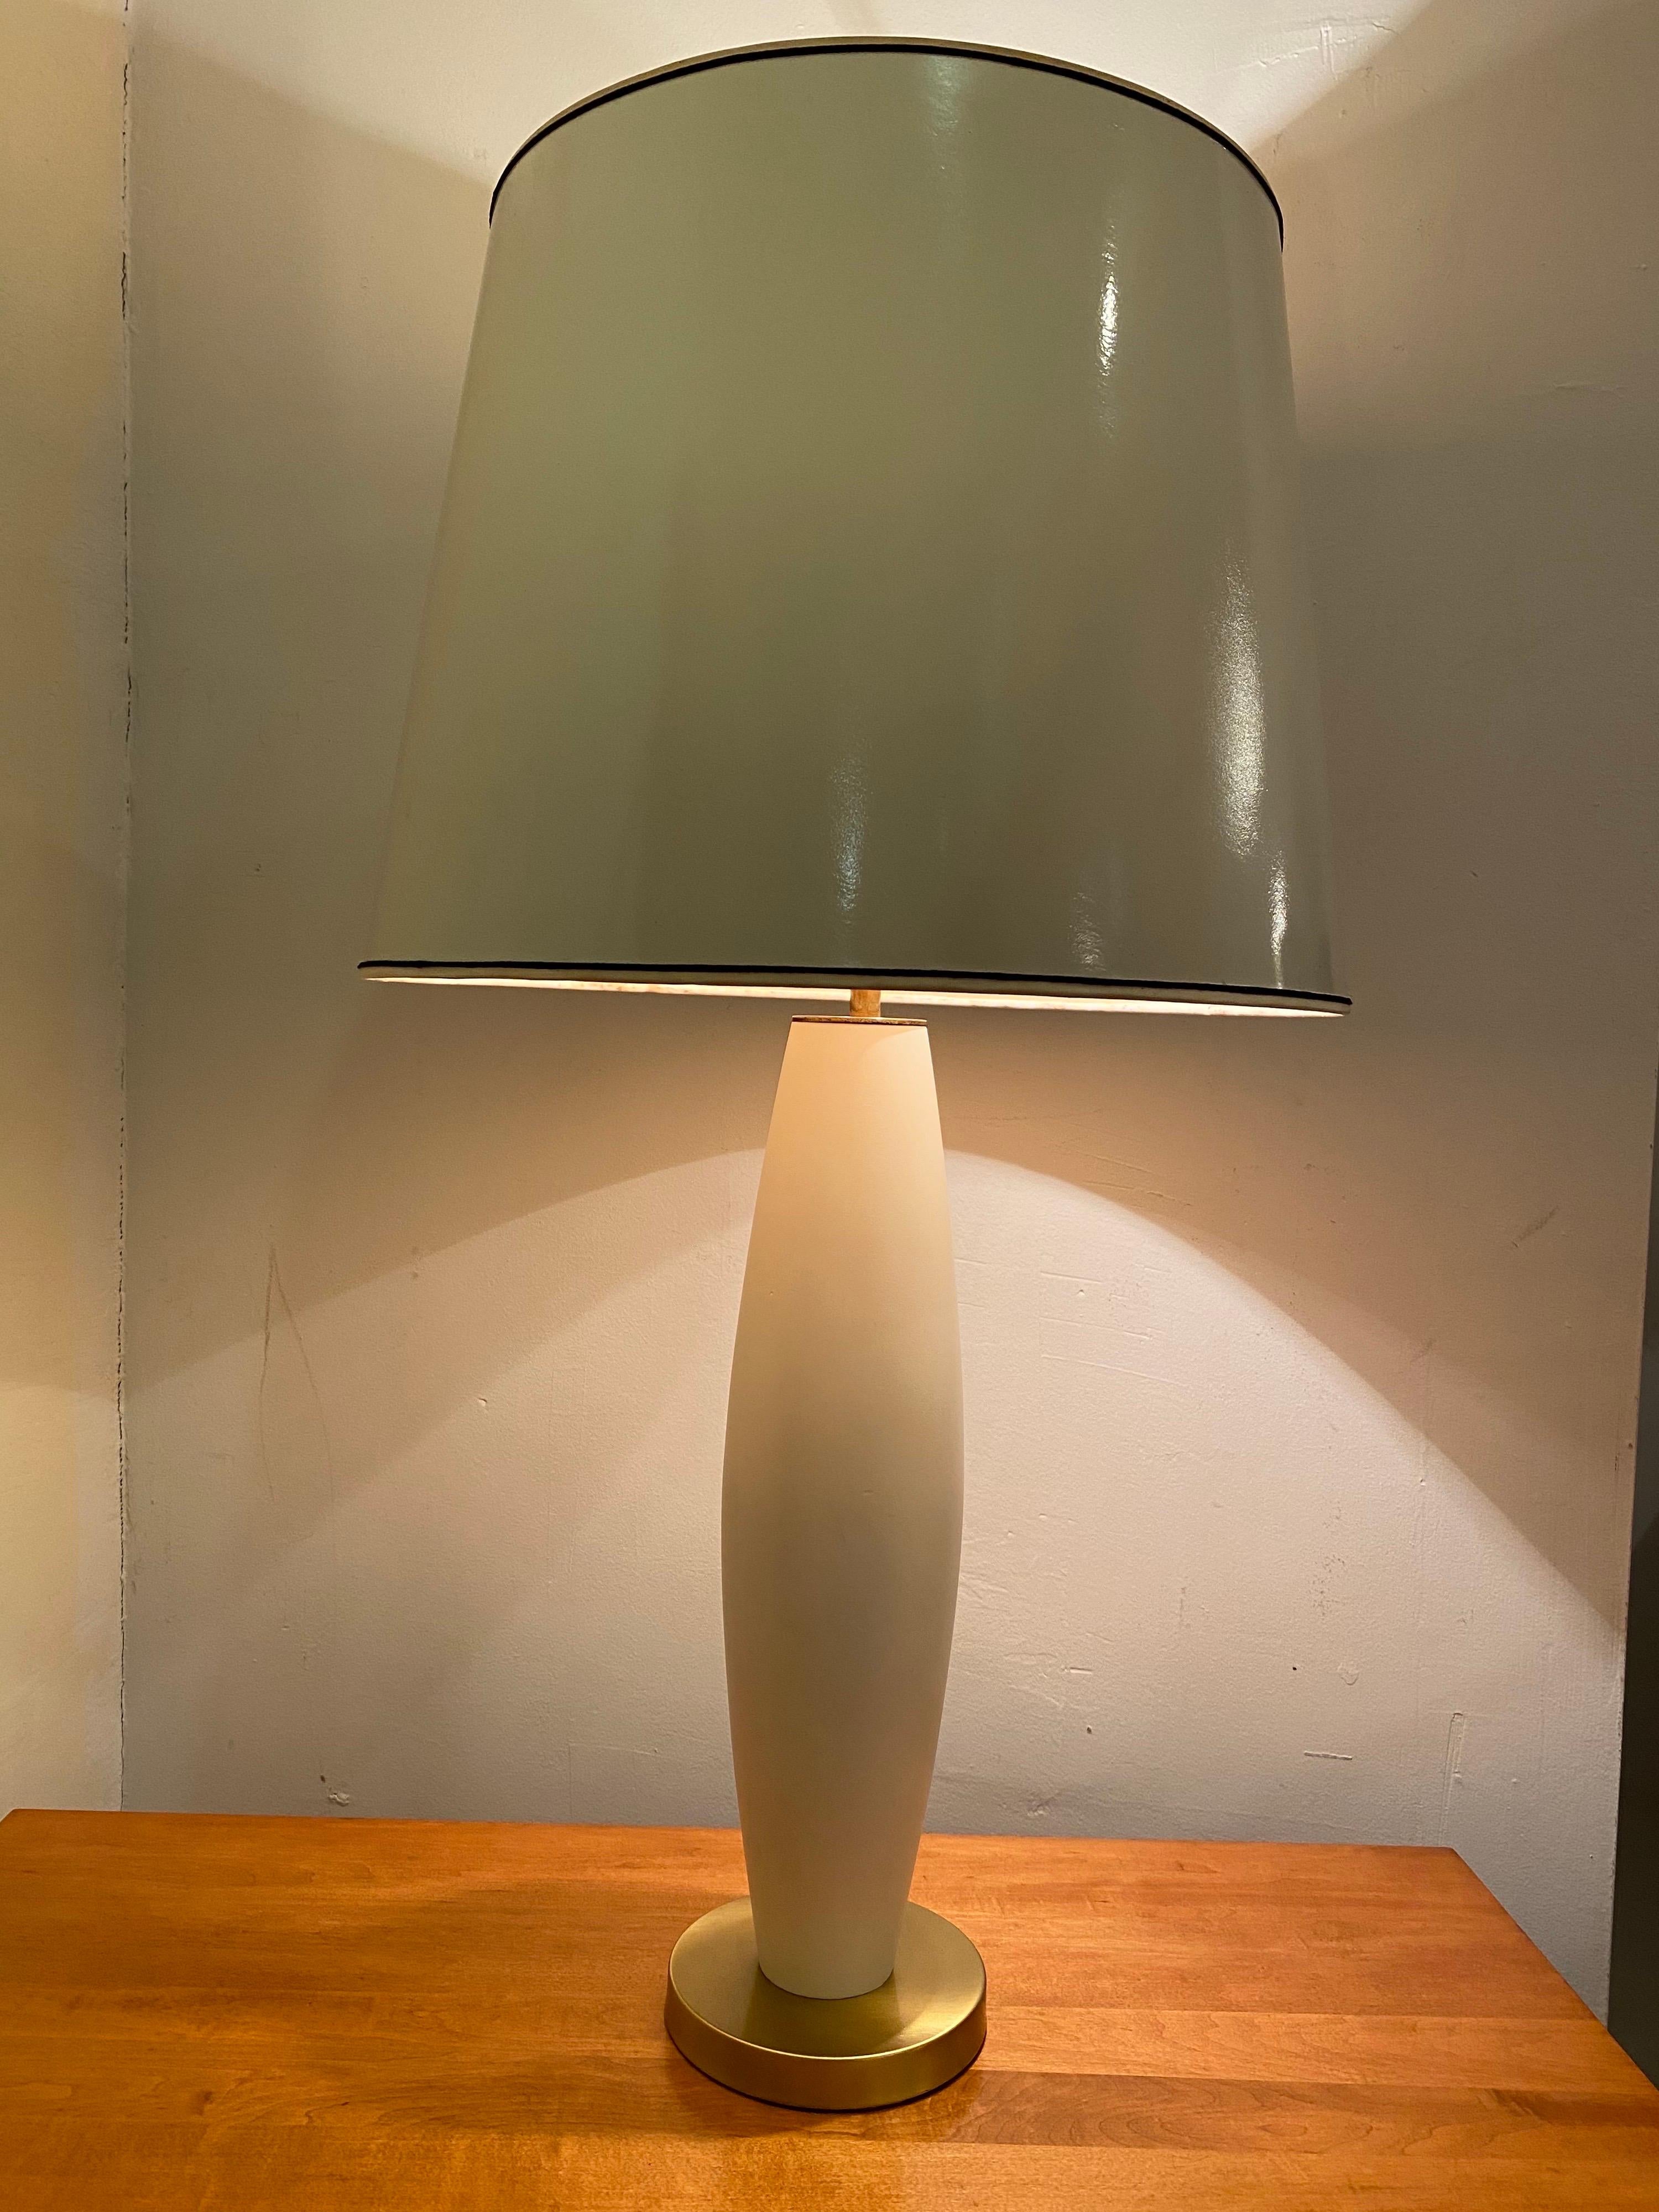 Bullet shaped table lamp with a round satin brass base. 3 pull chain sockets control the amount of light. Lamp is in great shape, appears that the lamp was repainted and brass polished within the last 10 years. Overall in great shape.